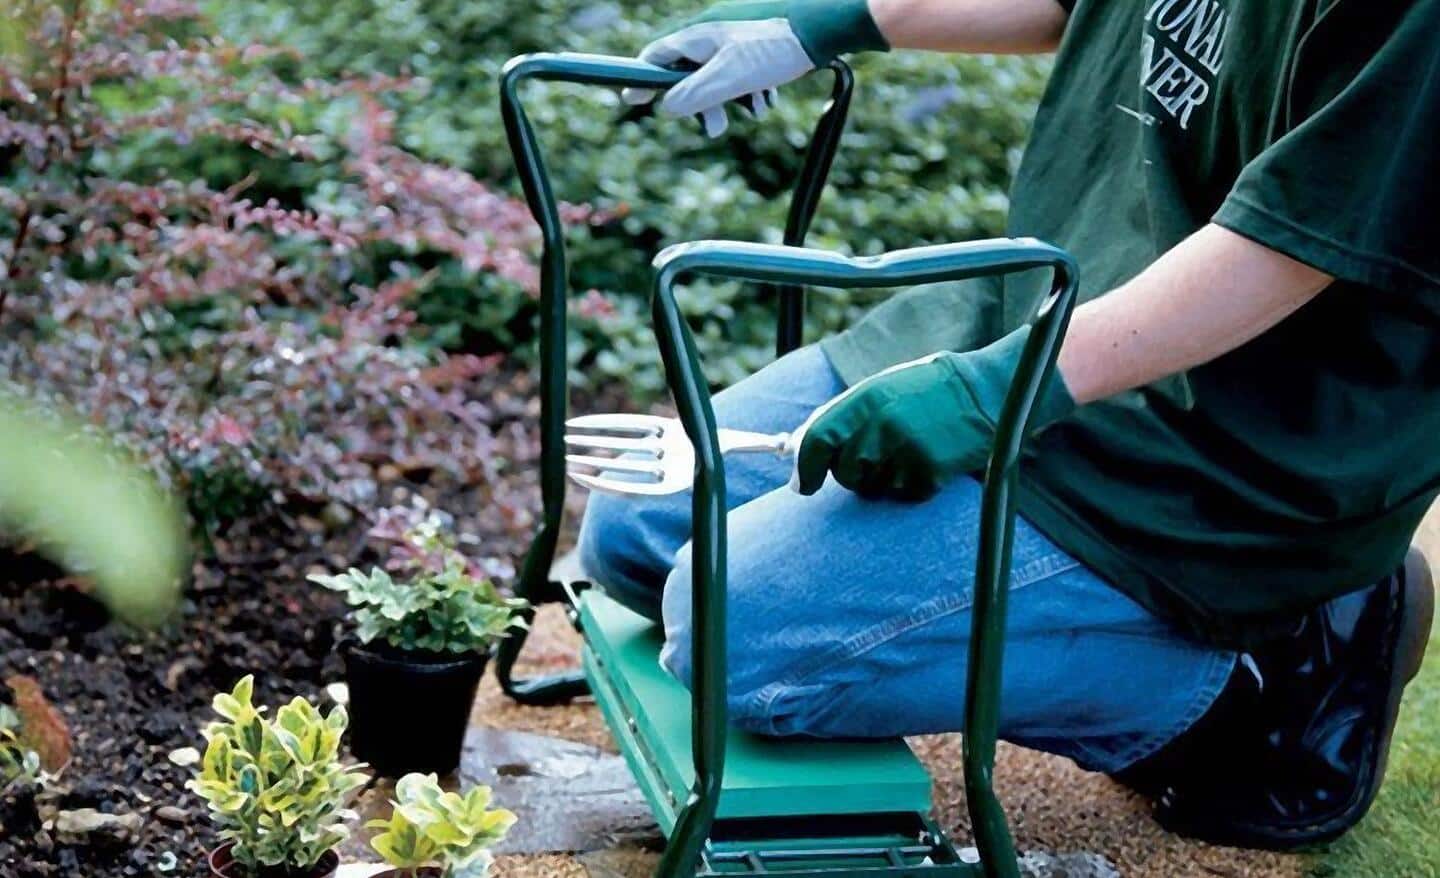 Person uses a garden kneeler to cushion their knees while pulling weeds